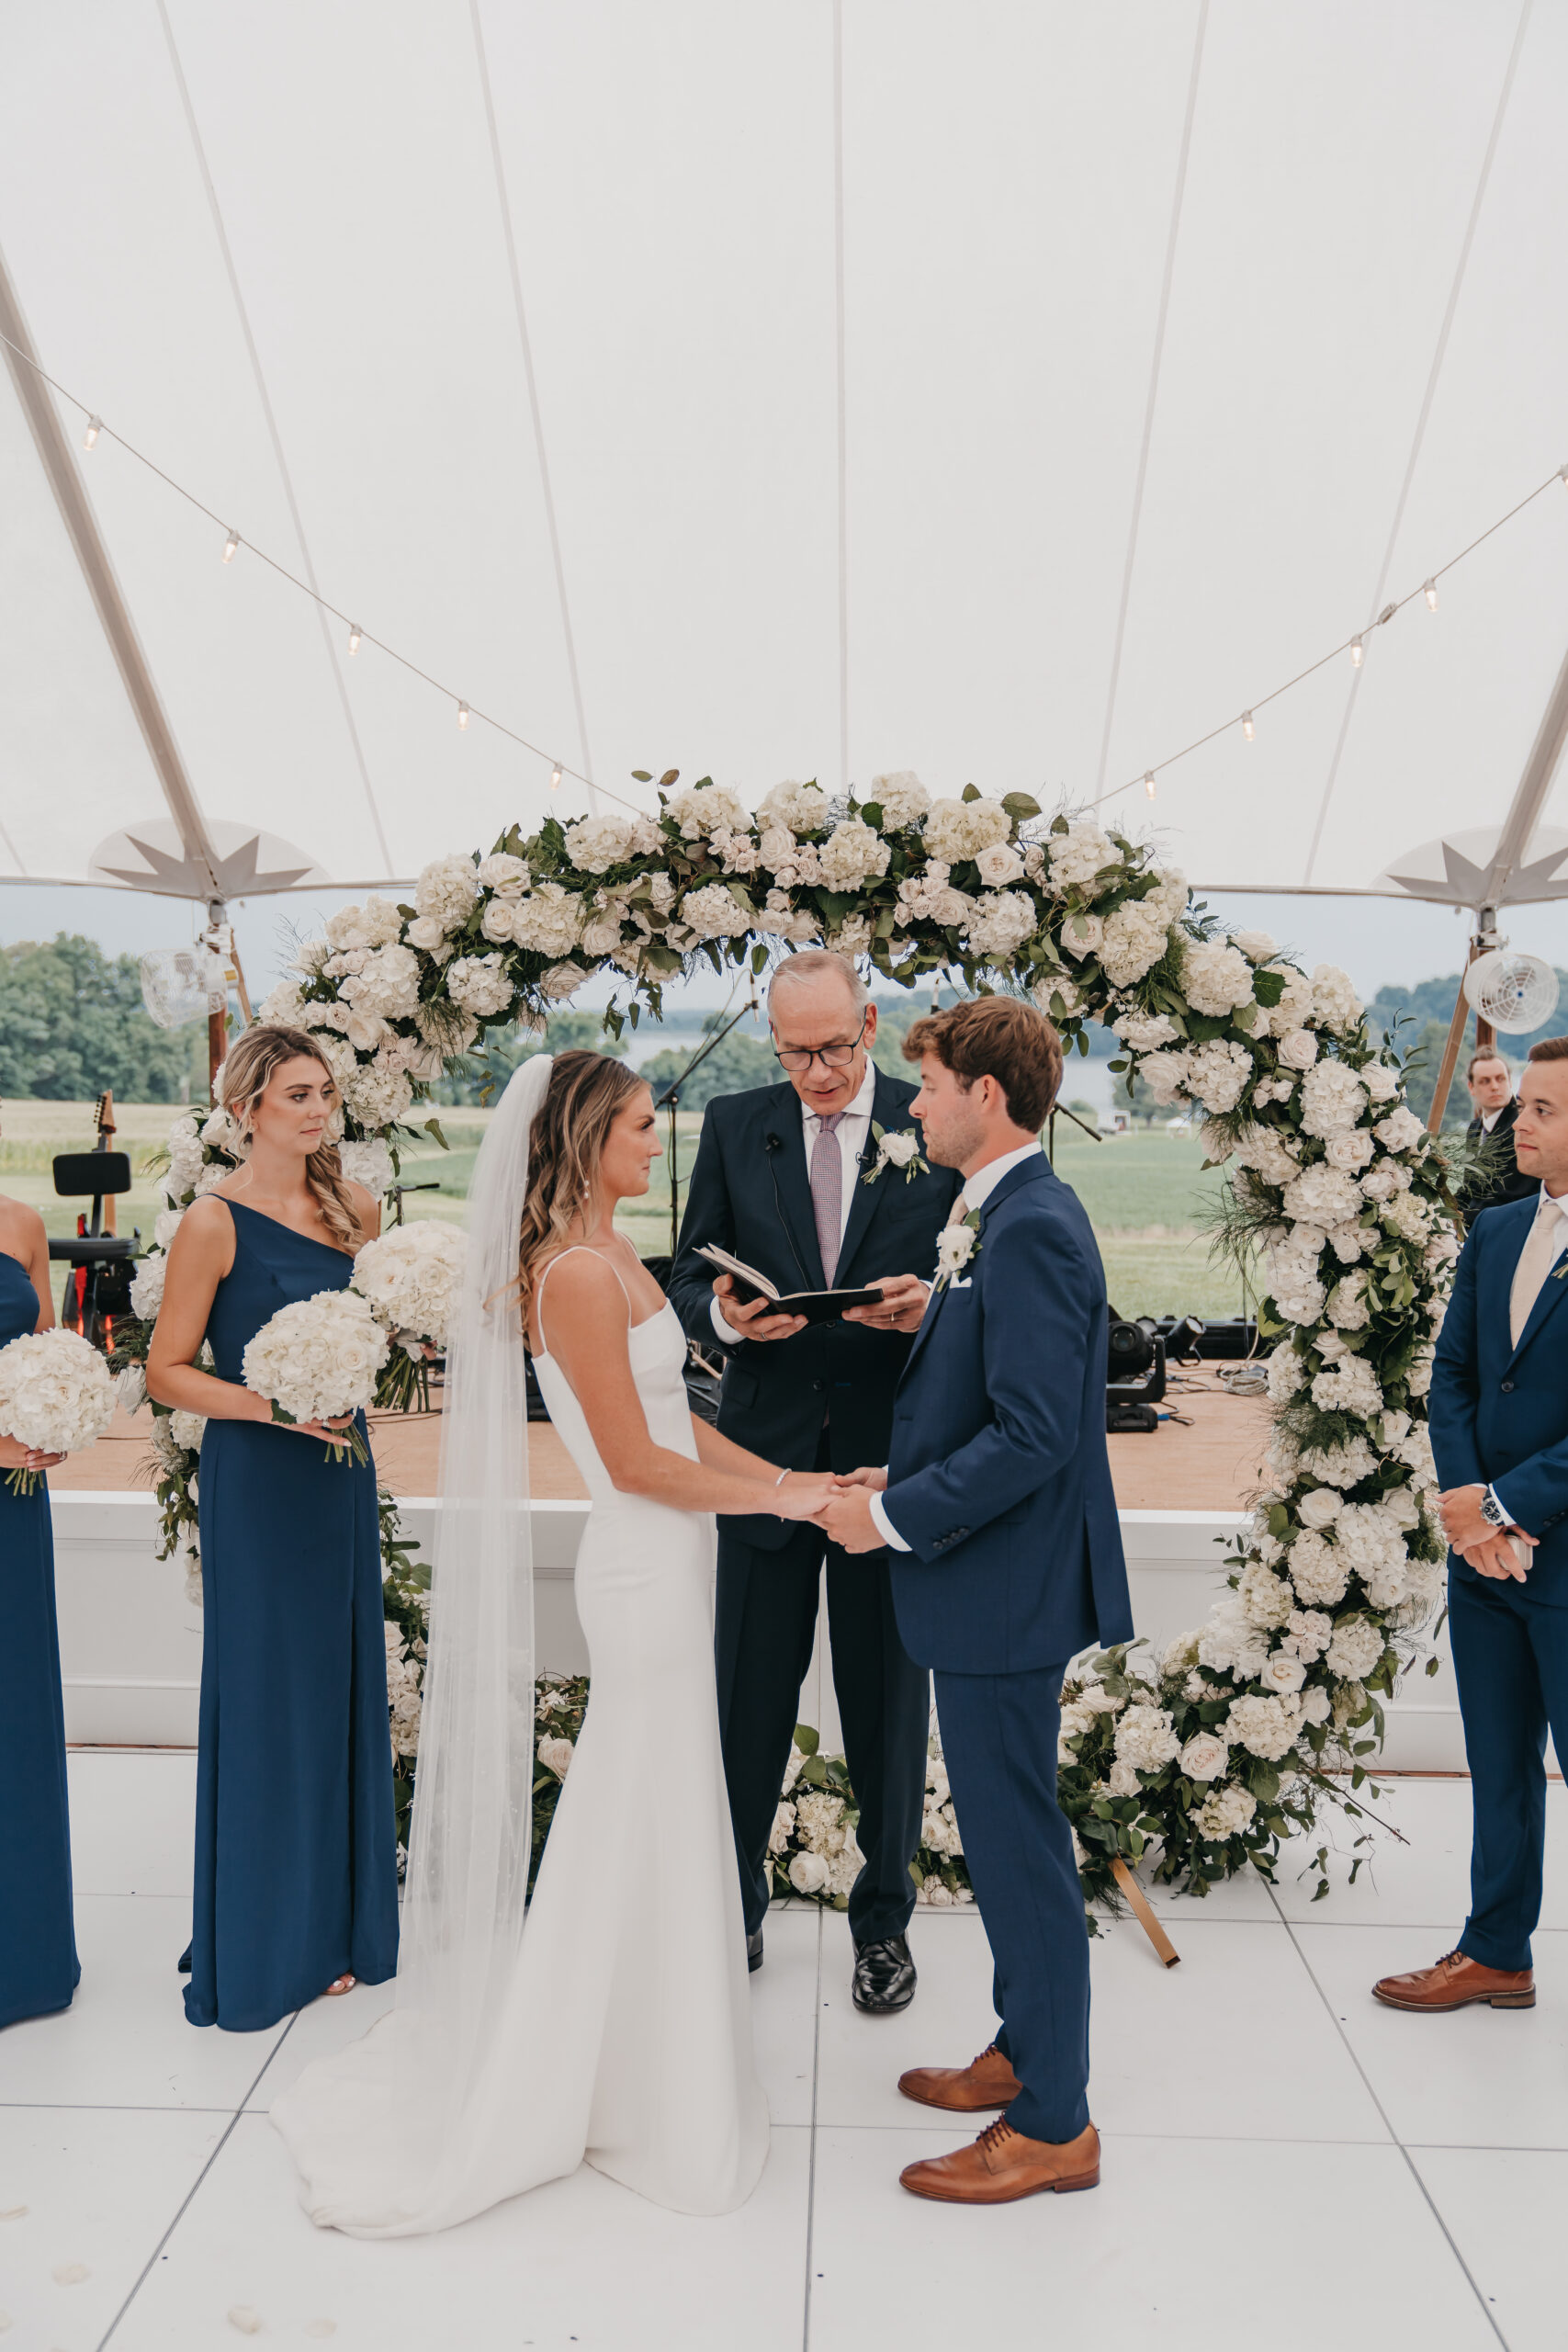 The Perfect 5 Christian Wedding Traditions For Your Big Day. Bride and groom holding hands during their wedding ceremony.